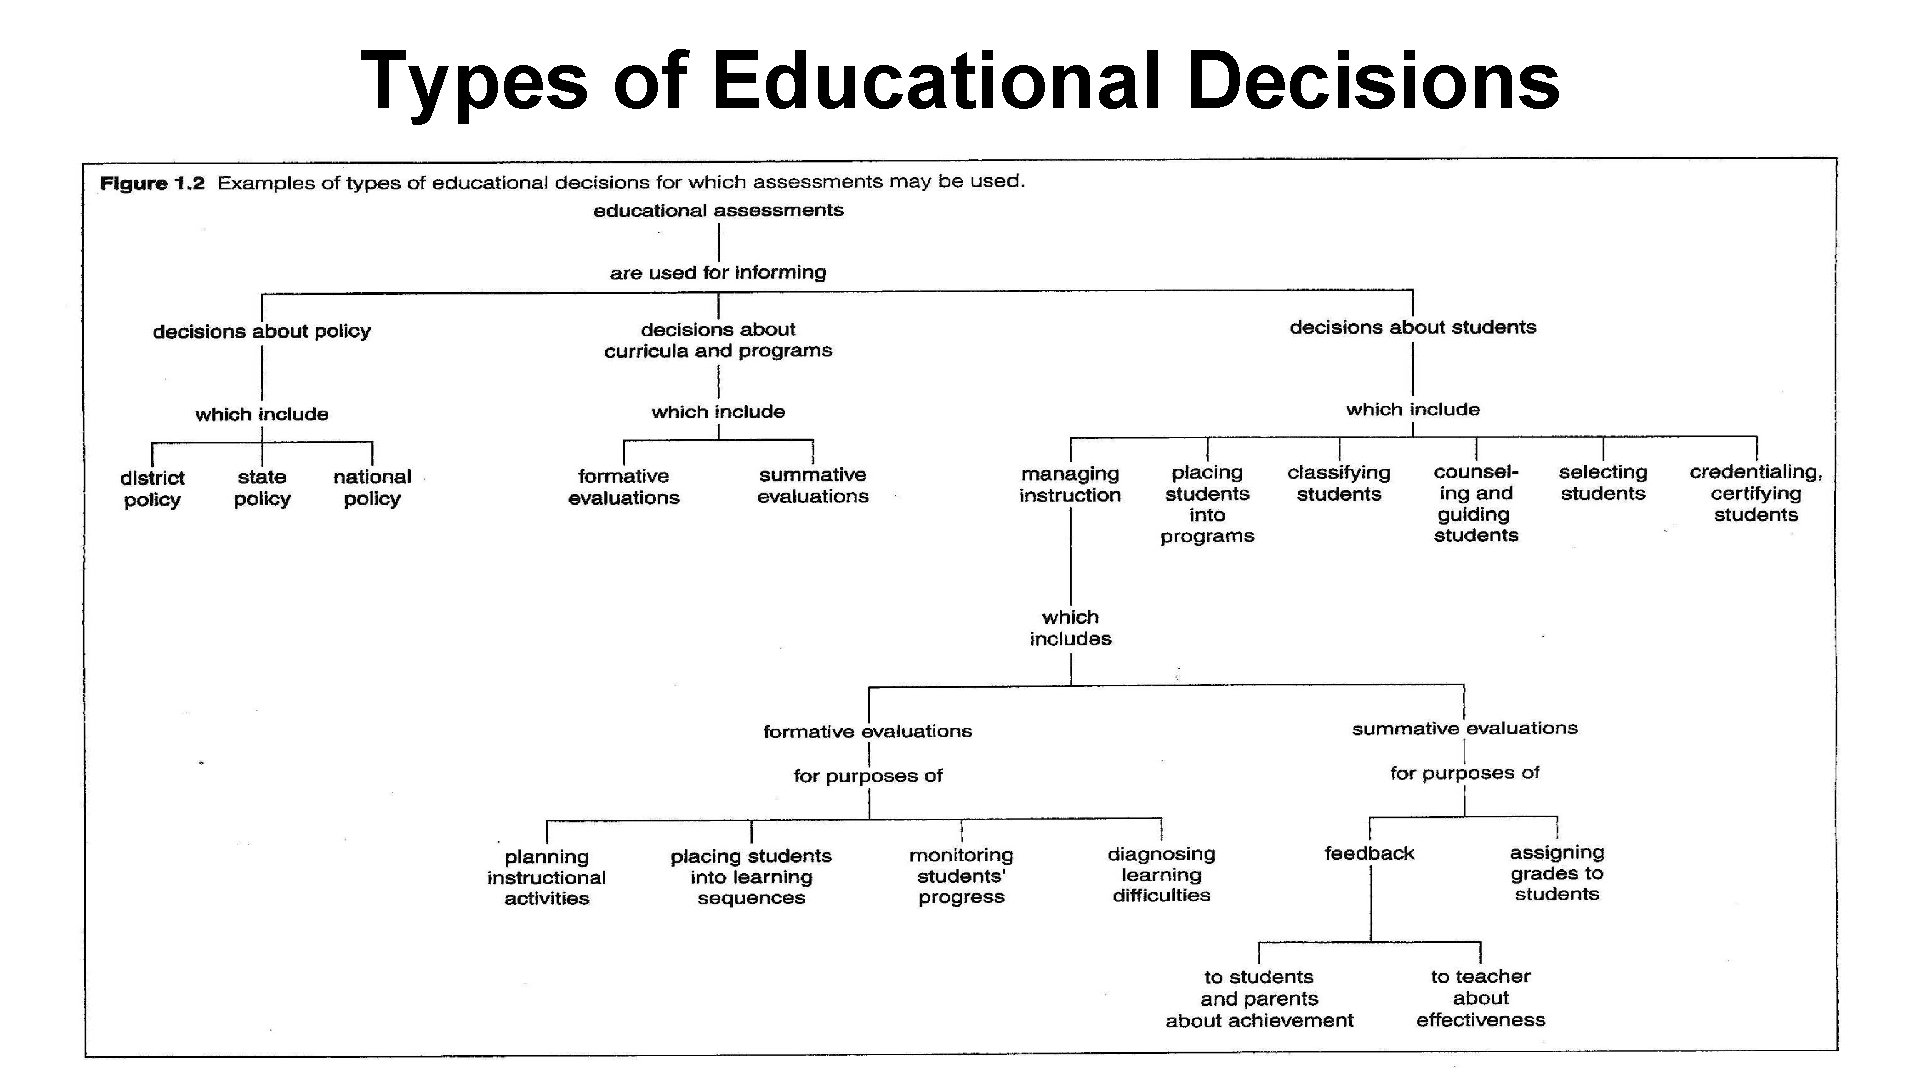 Types of Educational Decisions 